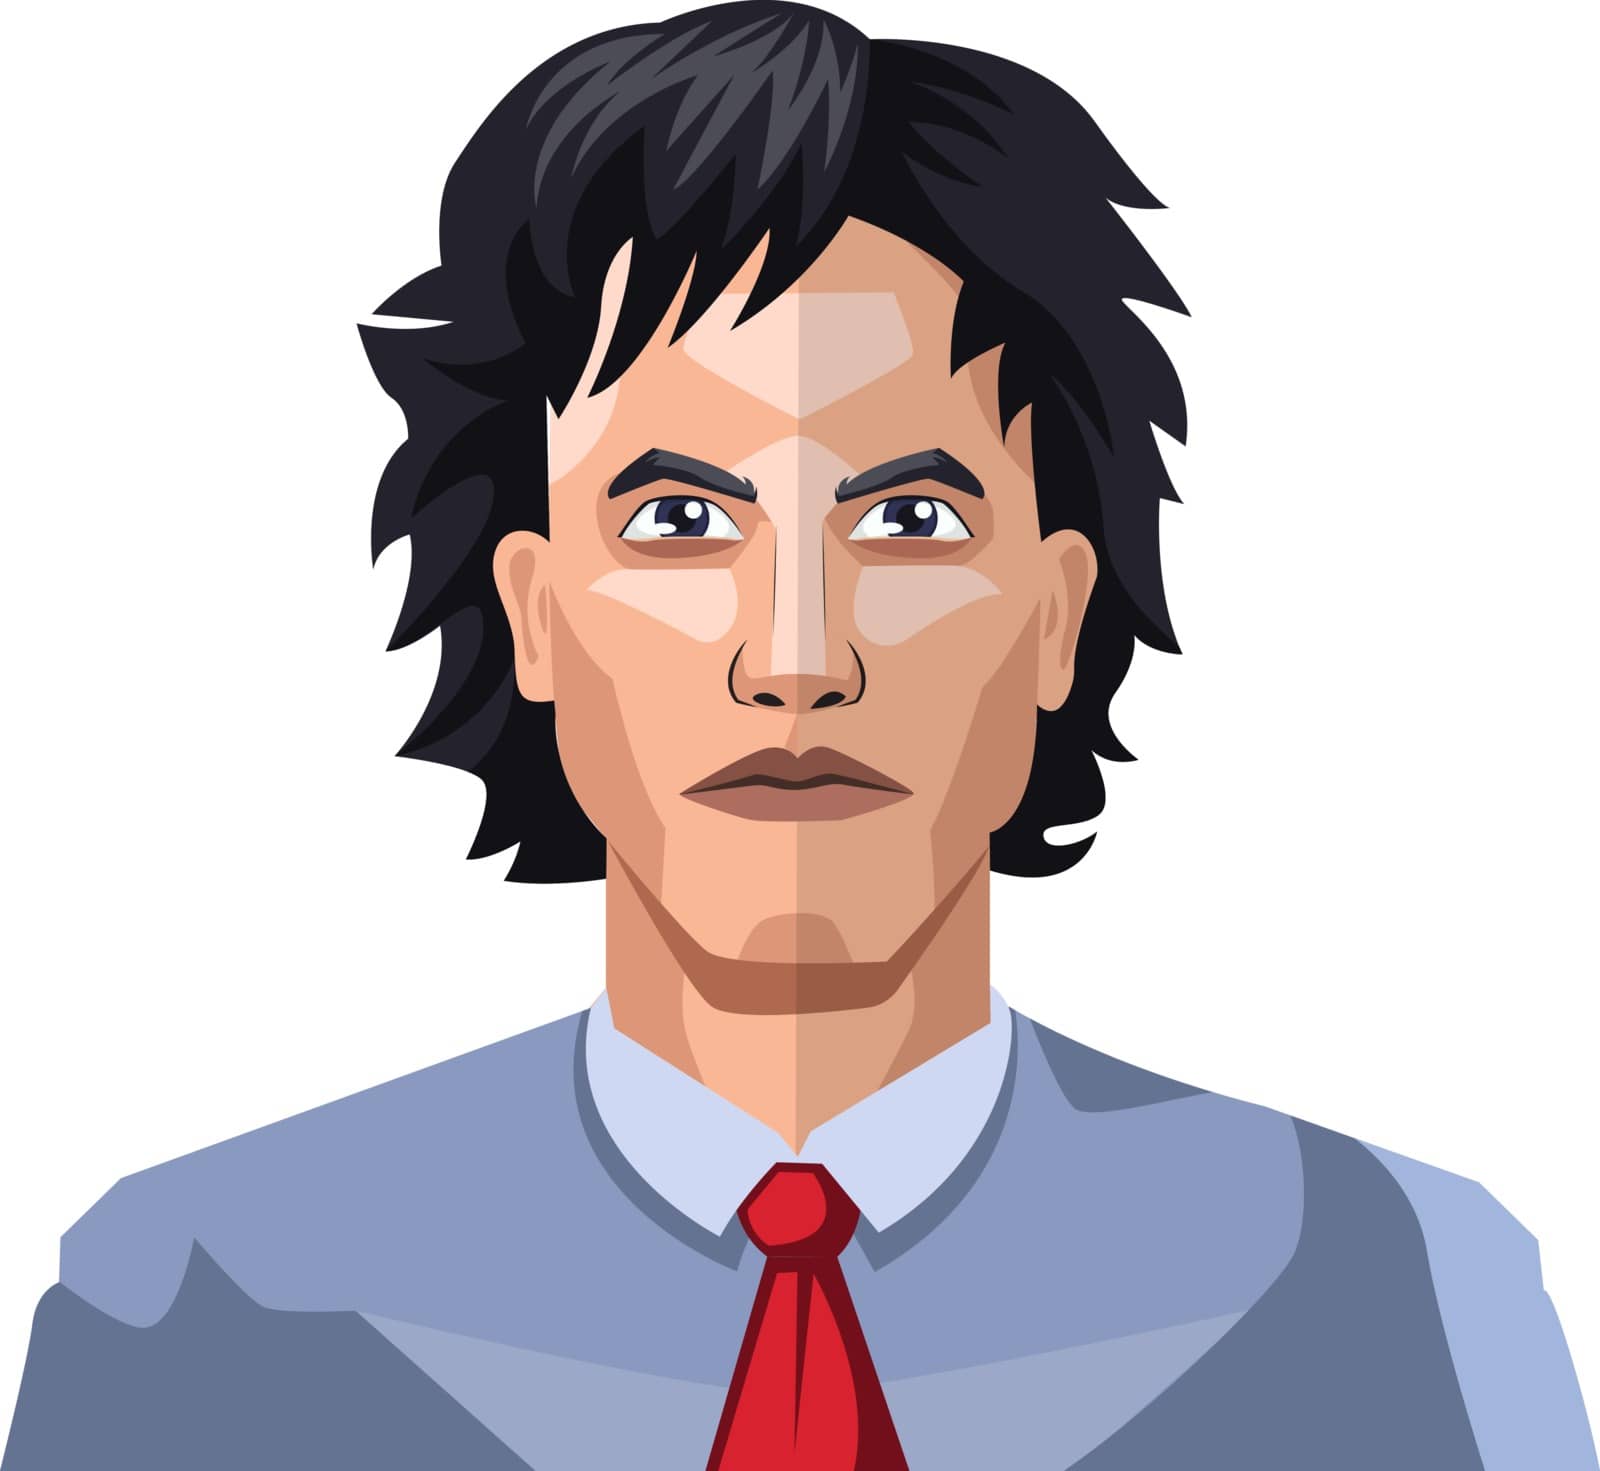 Handsome guy with long black hair illustration vector on white background